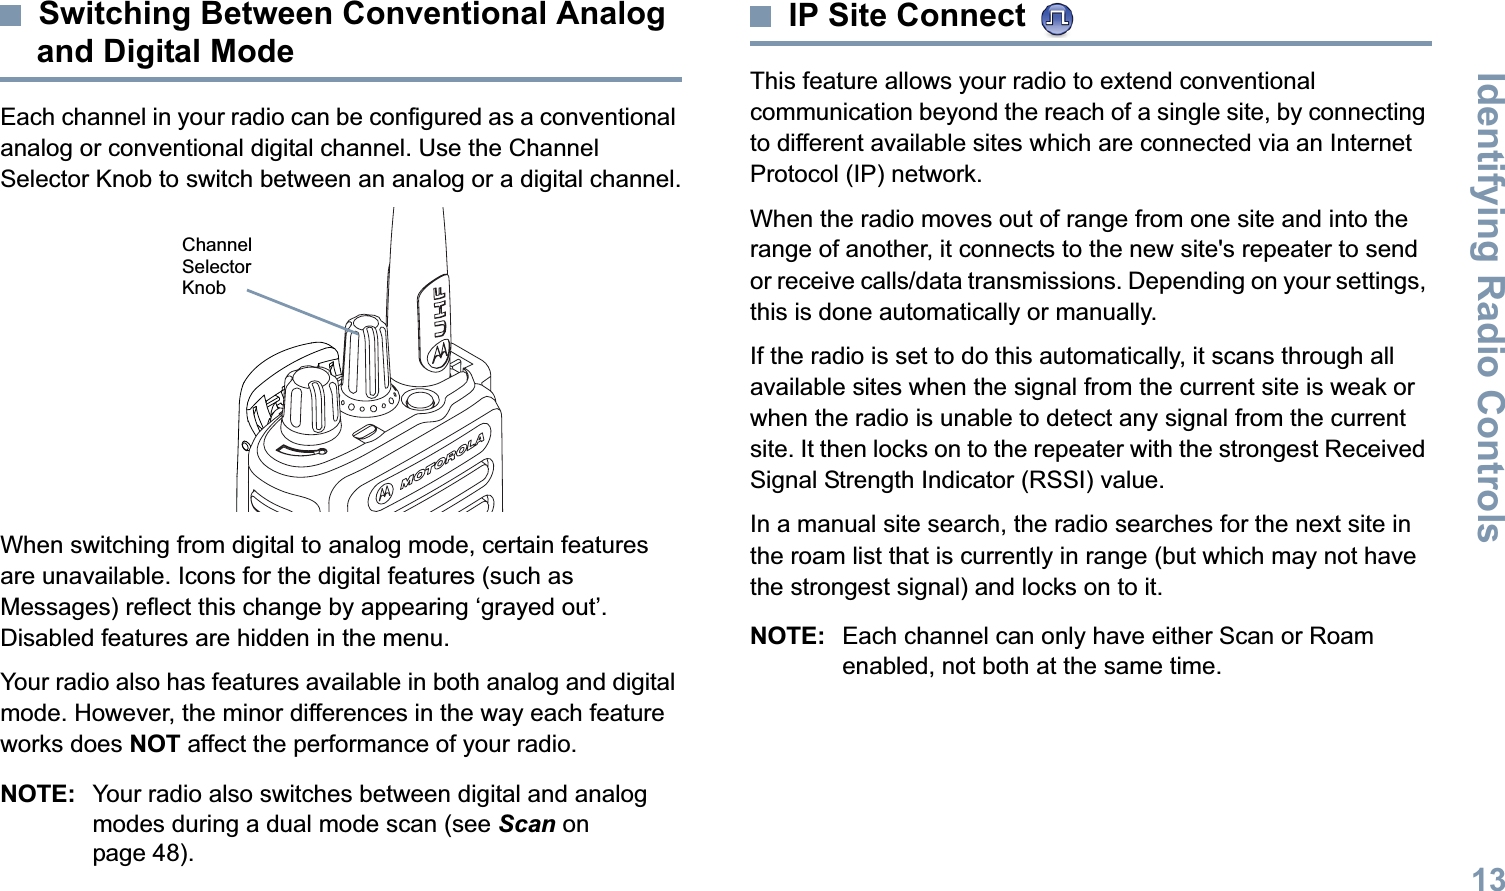 Identifying Radio ControlsEnglish13Switching Between Conventional Analog and Digital ModeEach channel in your radio can be configured as a conventional analog or conventional digital channel. Use the Channel Selector Knob to switch between an analog or a digital channel.When switching from digital to analog mode, certain features are unavailable. Icons for the digital features (such as Messages) reflect this change by appearing ‘grayed out’. Disabled features are hidden in the menu.Your radio also has features available in both analog and digital mode. However, the minor differences in the way each feature works does NOT affect the performance of your radio.NOTE: Your radio also switches between digital and analog modes during a dual mode scan (see Scan on page 48). IP Site Connect This feature allows your radio to extend conventional communication beyond the reach of a single site, by connecting to different available sites which are connected via an Internet Protocol (IP) network.When the radio moves out of range from one site and into the range of another, it connects to the new site&apos;s repeater to send or receive calls/data transmissions. Depending on your settings, this is done automatically or manually.If the radio is set to do this automatically, it scans through all available sites when the signal from the current site is weak or when the radio is unable to detect any signal from the current site. It then locks on to the repeater with the strongest Received Signal Strength Indicator (RSSI) value.In a manual site search, the radio searches for the next site in the roam list that is currently in range (but which may not have the strongest signal) and locks on to it.NOTE: Each channel can only have either Scan or Roam enabled, not both at the same time.Channel Selector Knob